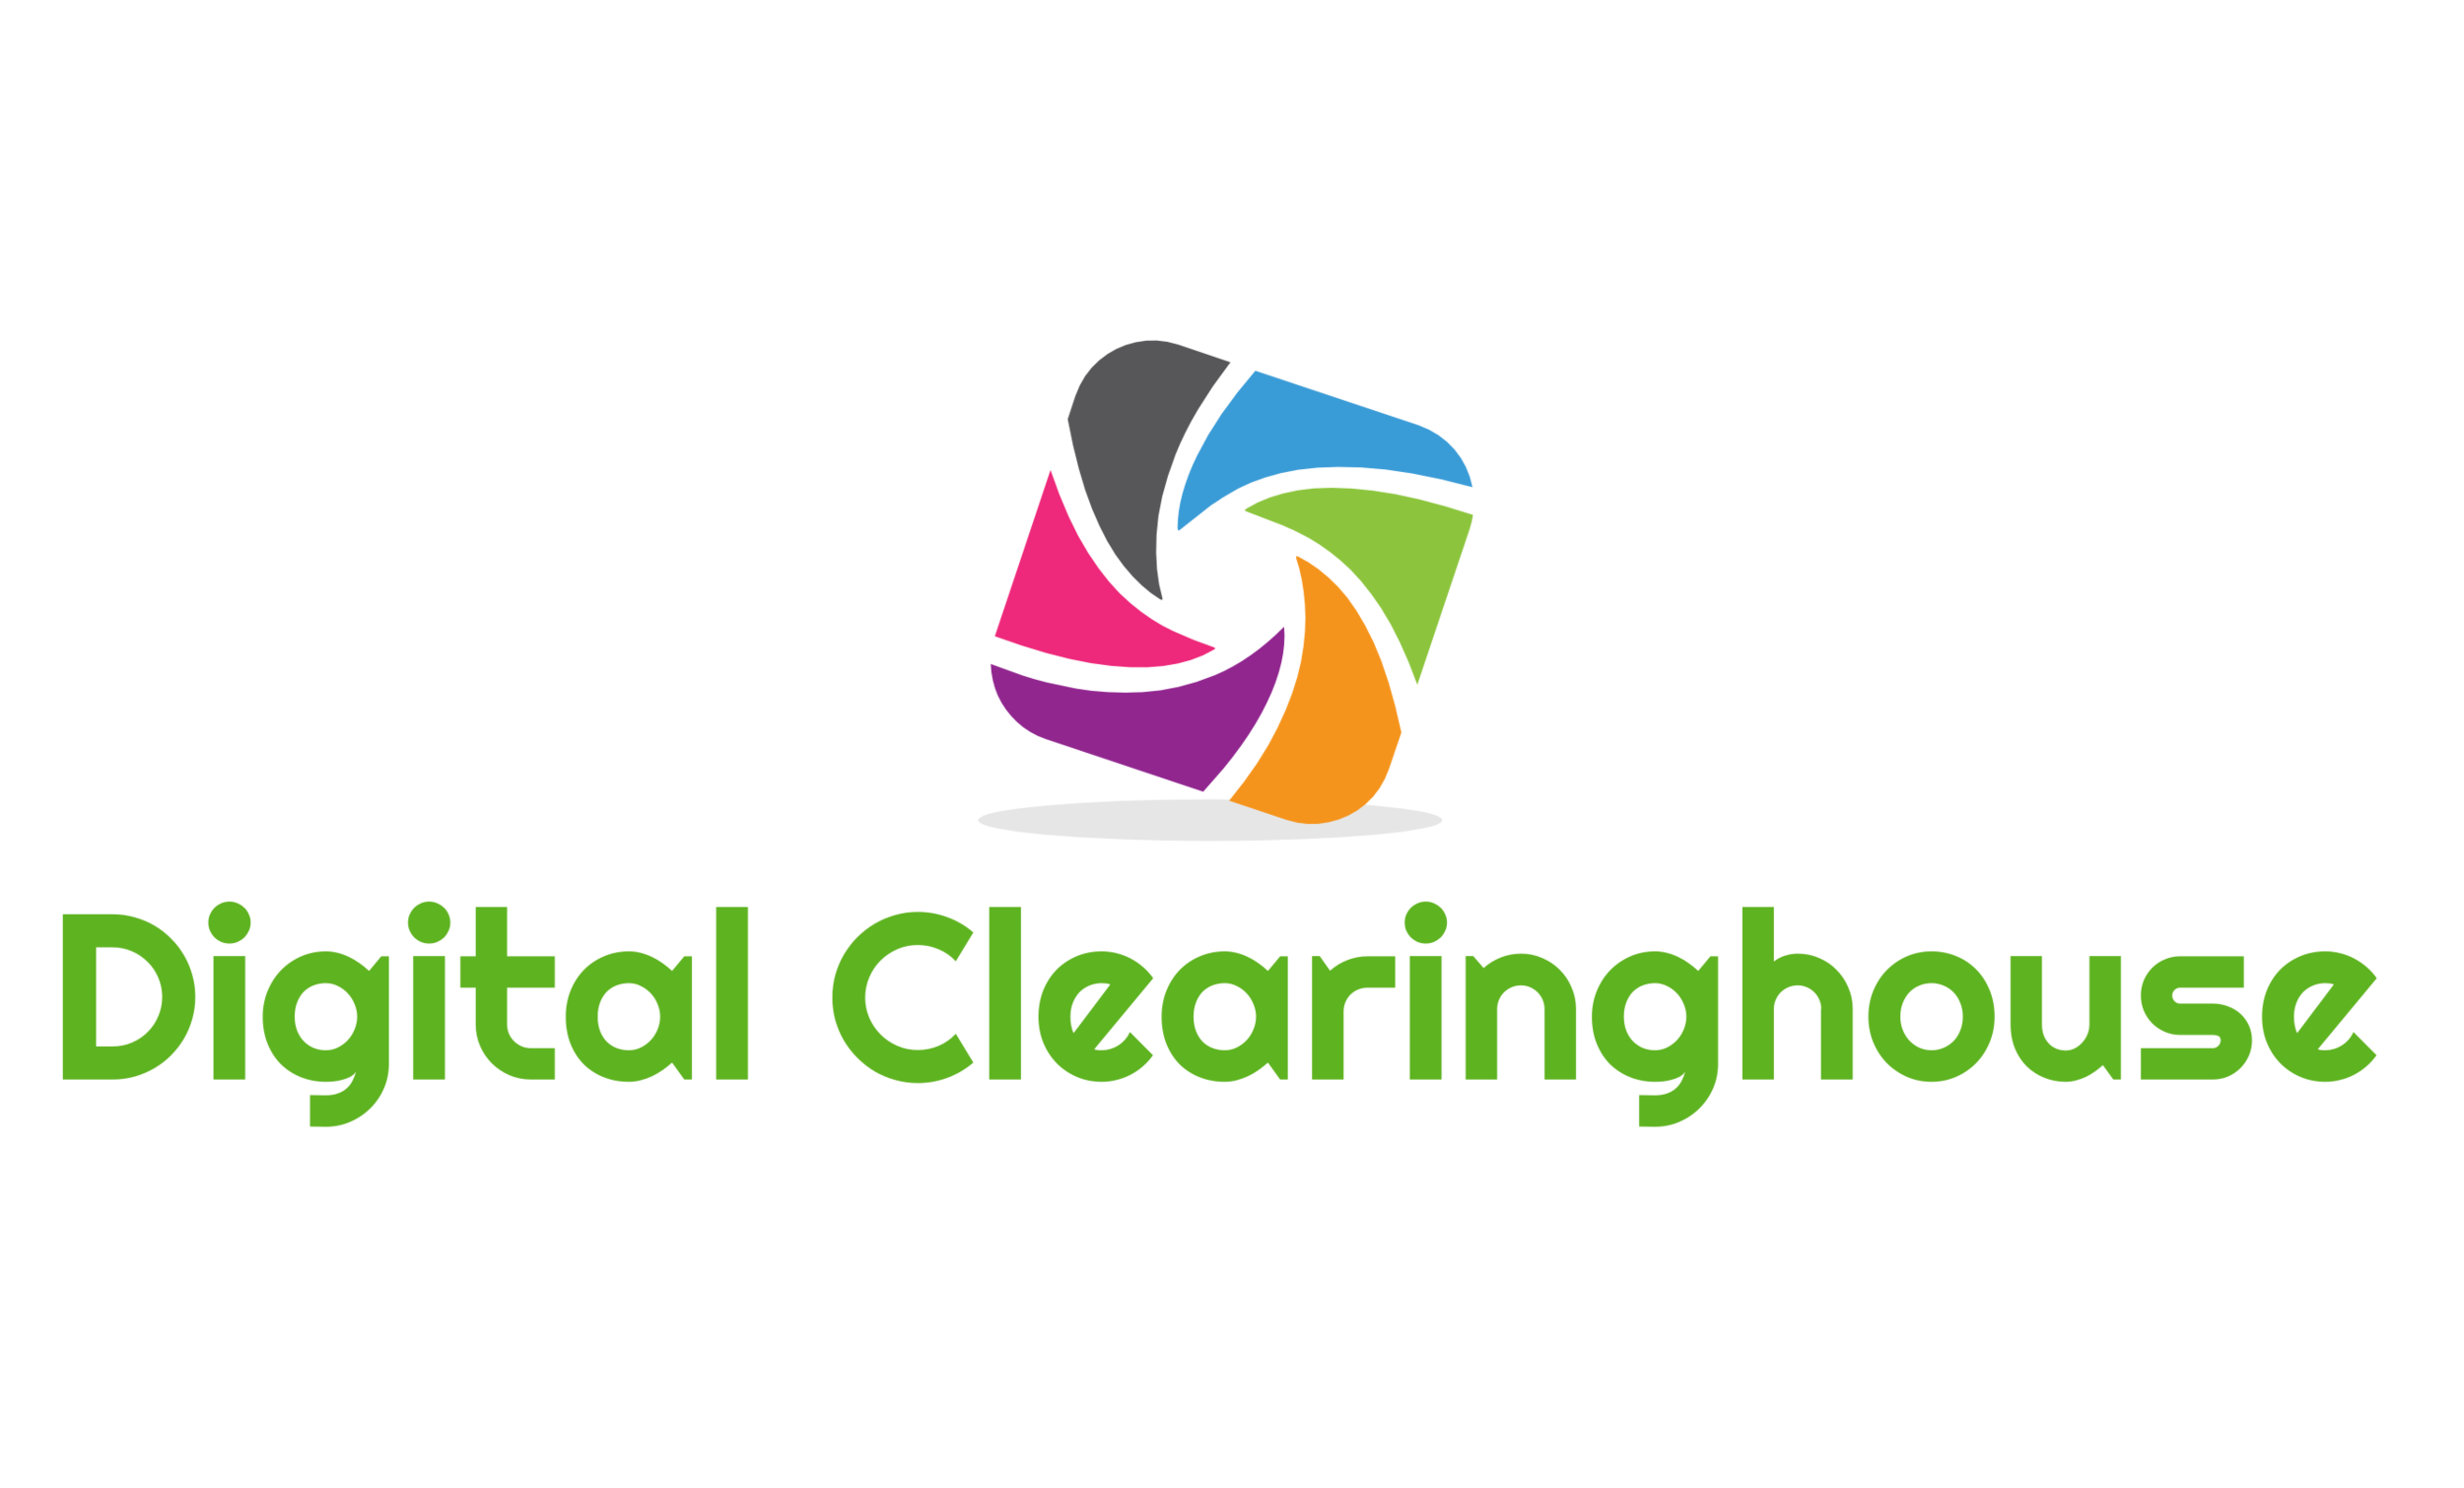 Digital Clearinghouse